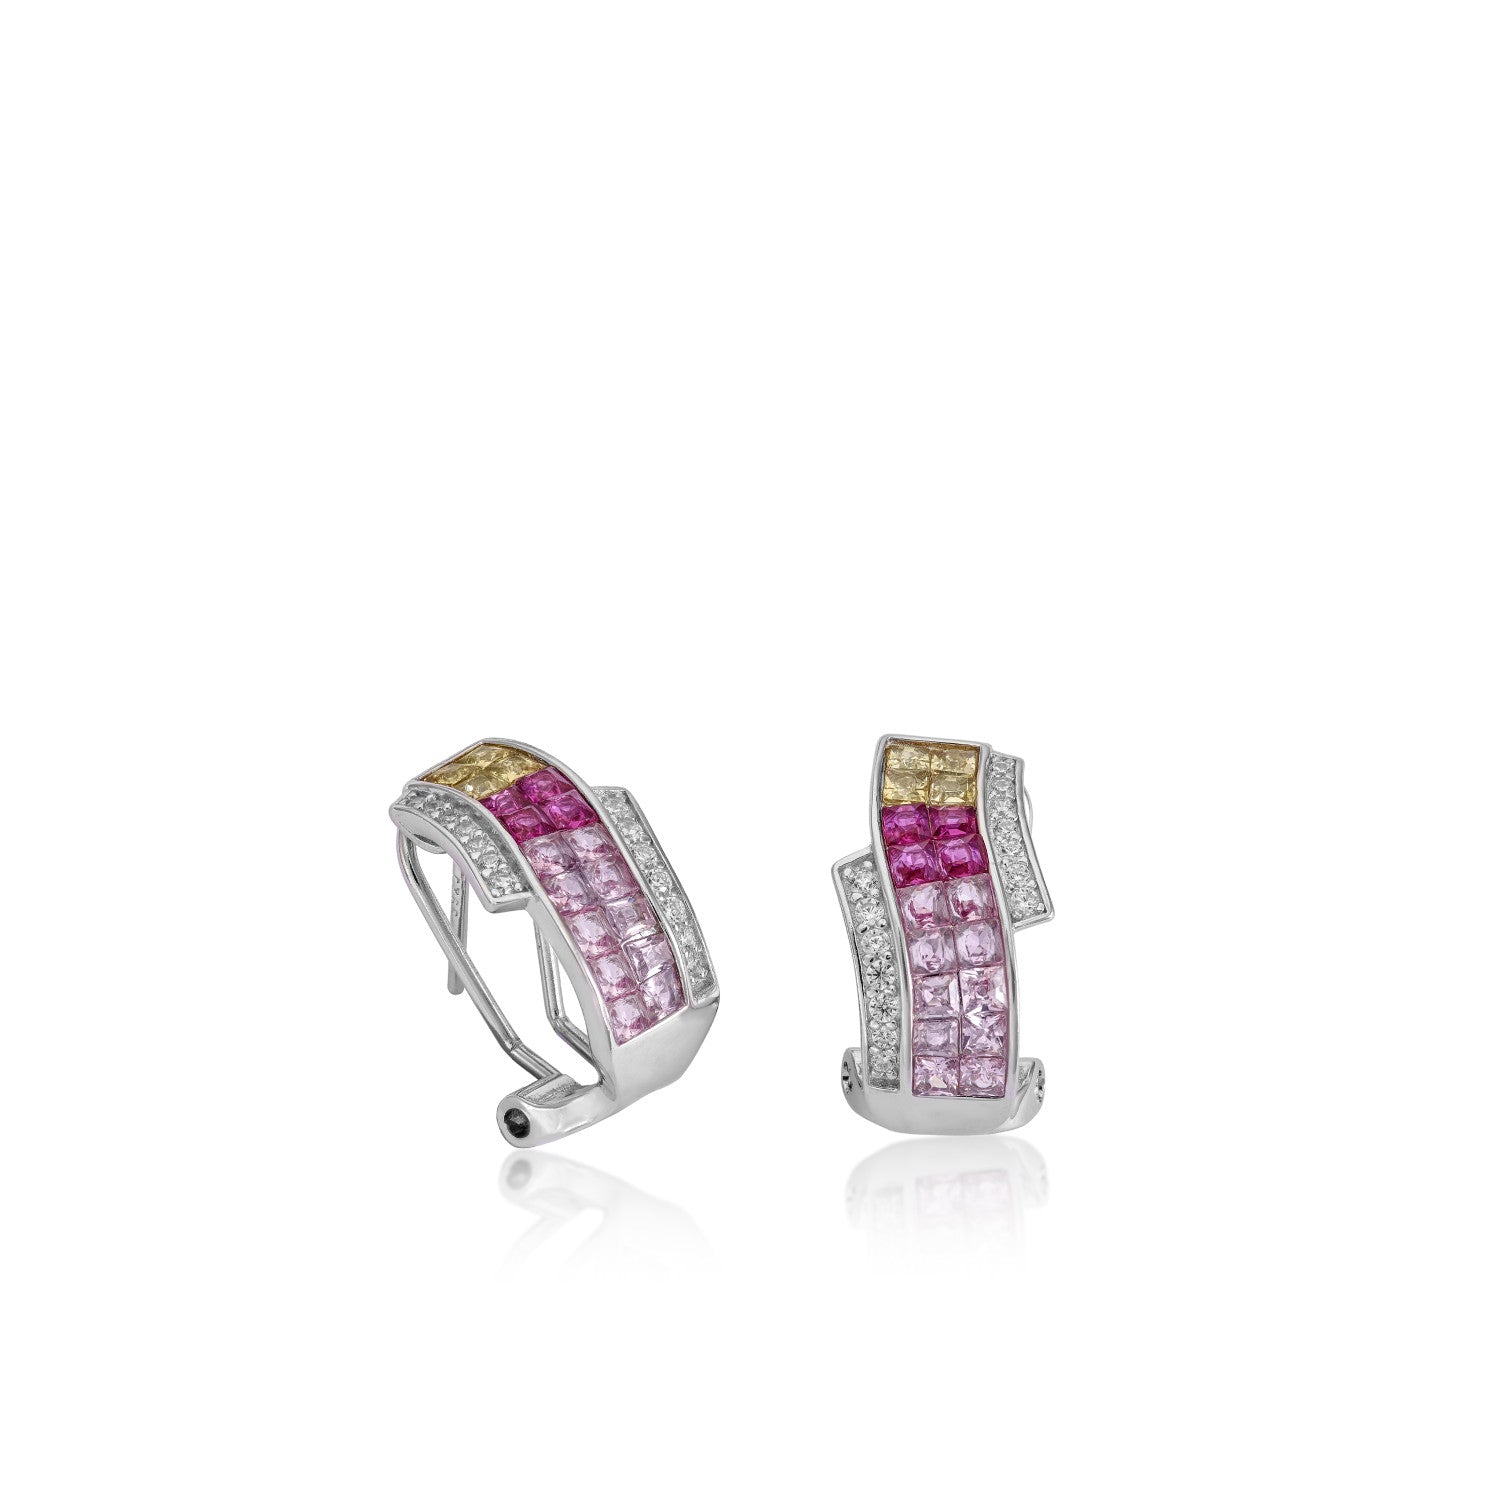 Earrings with omega clasp double rail clasp in pink tones